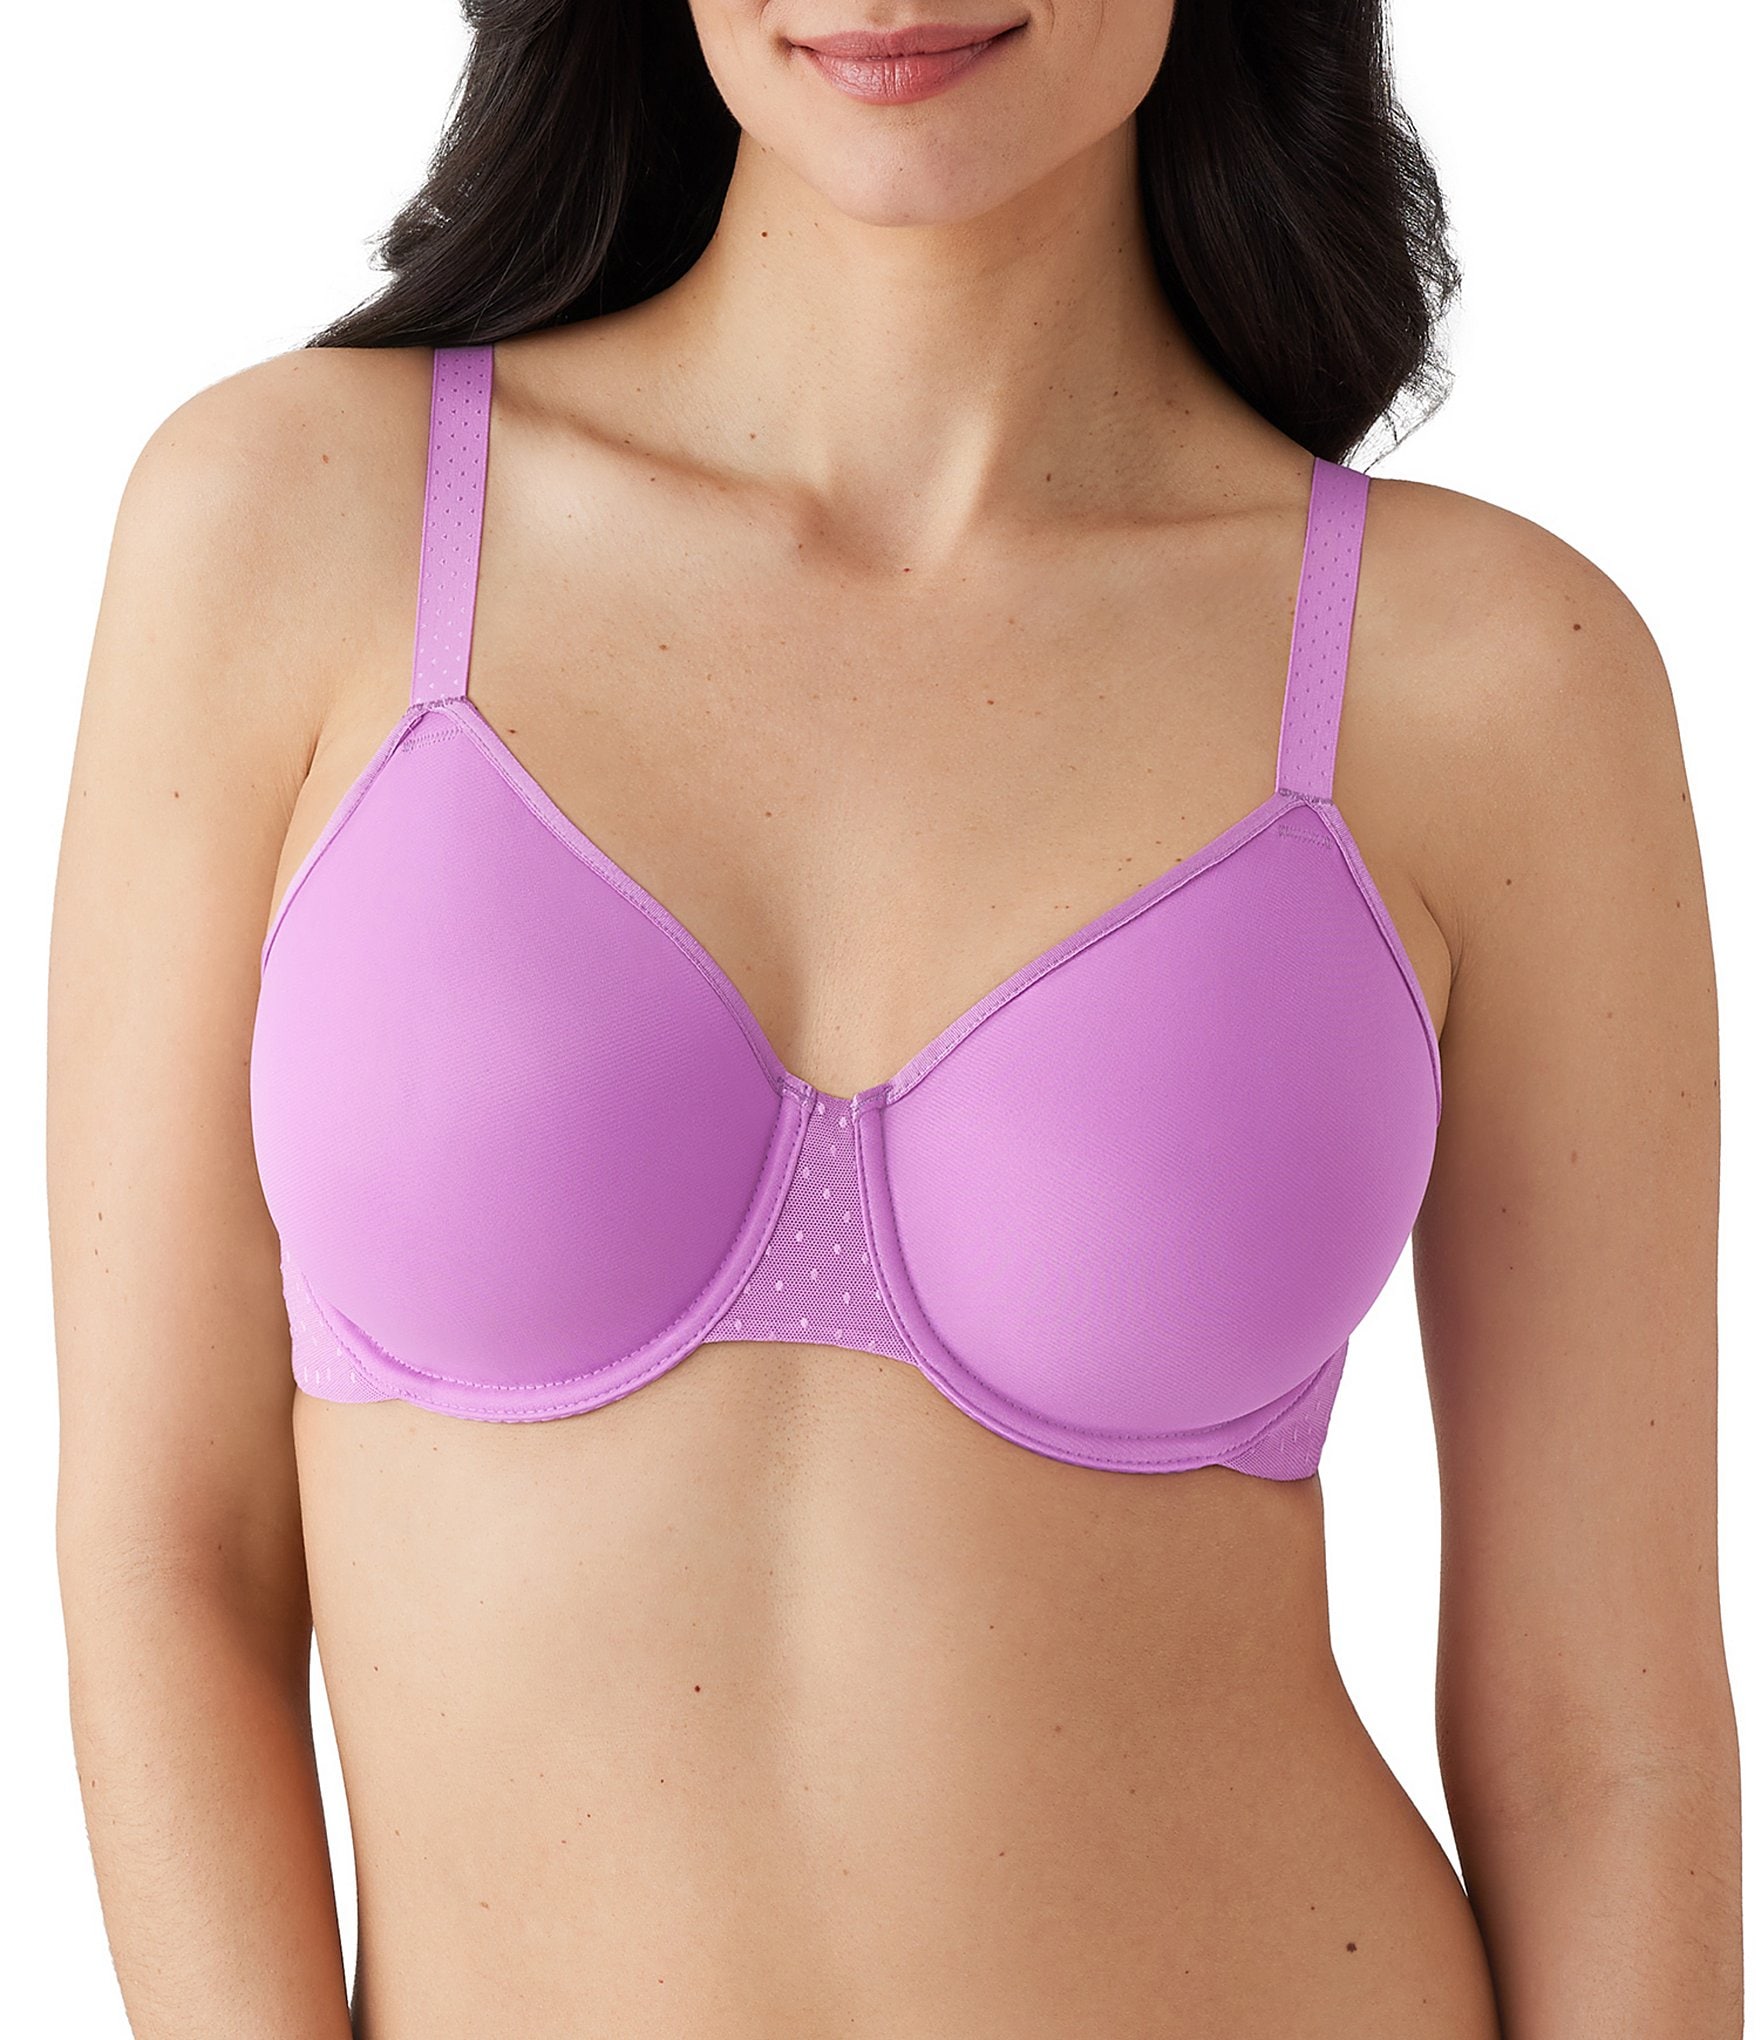 Wacoal Back Appeal Full Coverage Back & Side Smoothing Underwire Bra - Blue  (38D)